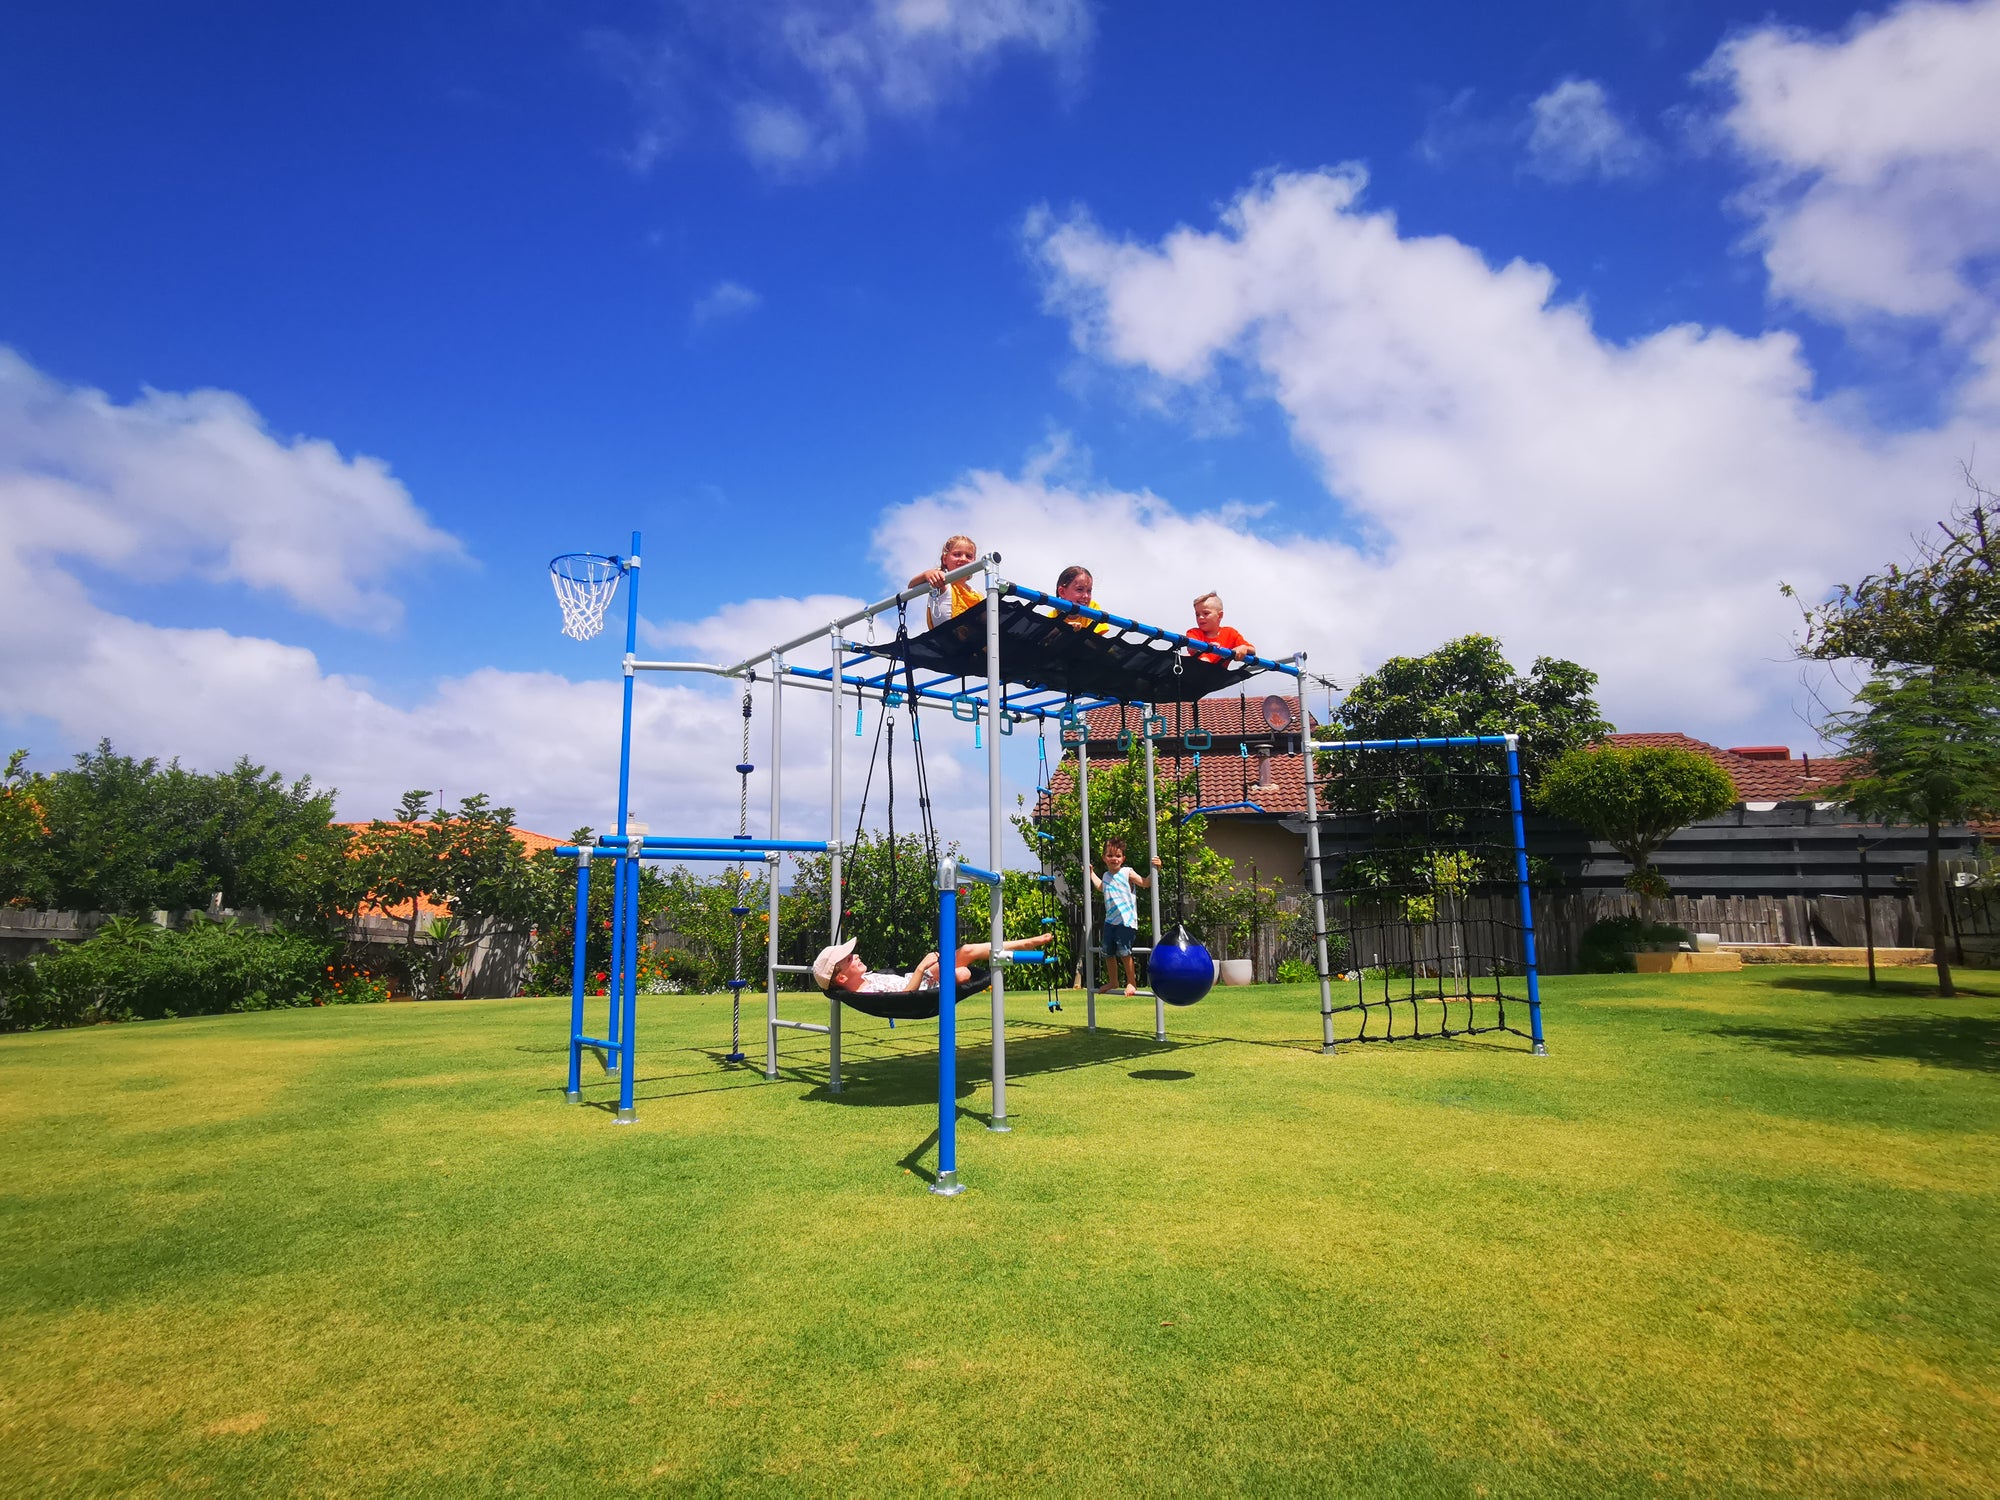 Are Climbing Frames Good For Kids?